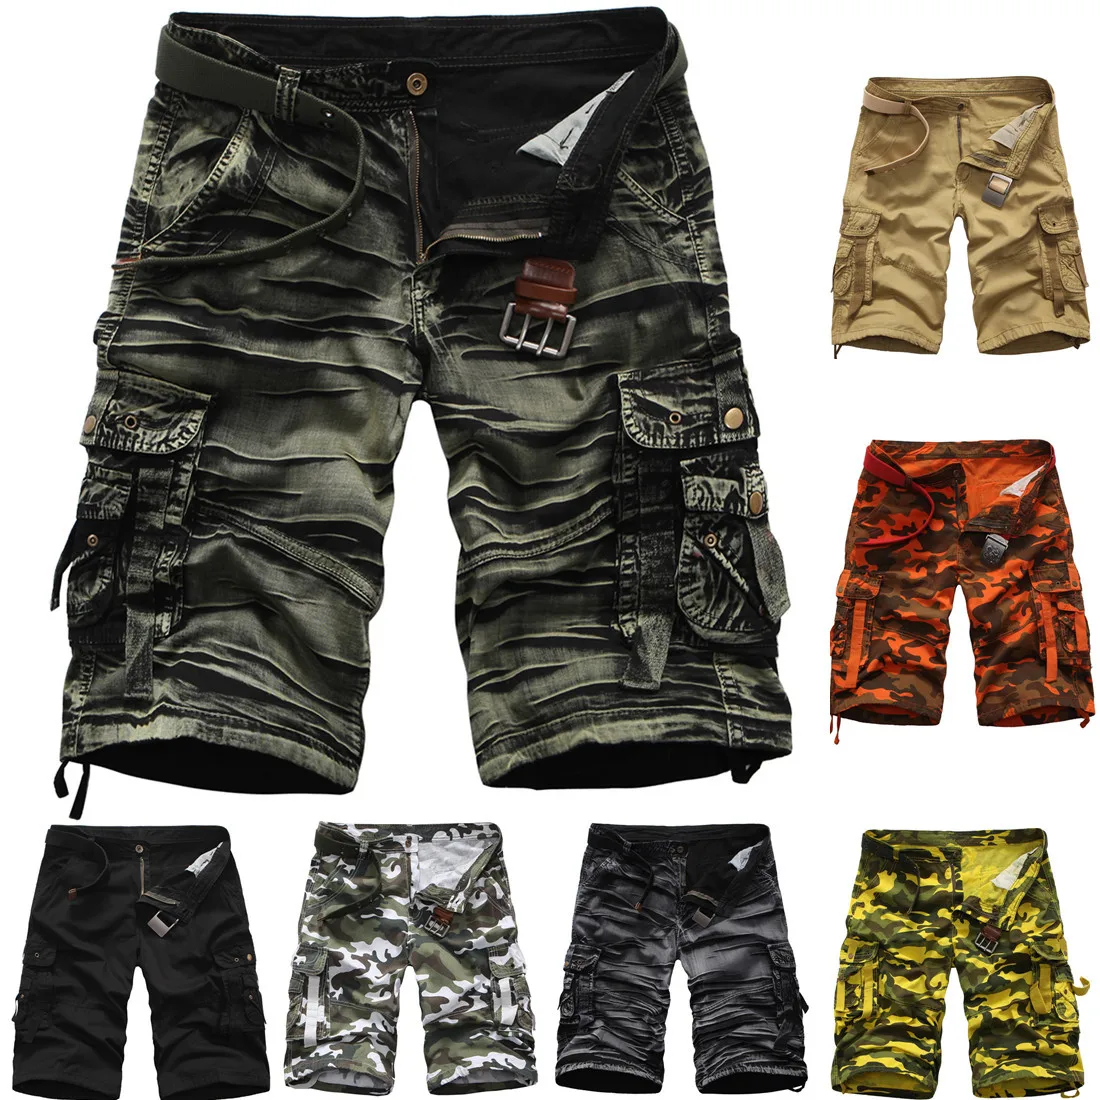 Summer Men's Cotton Fabric Shorts Camouflage Solid Color Loose Large Casual Knee Length Safari Style Short Pants Outdoor Street